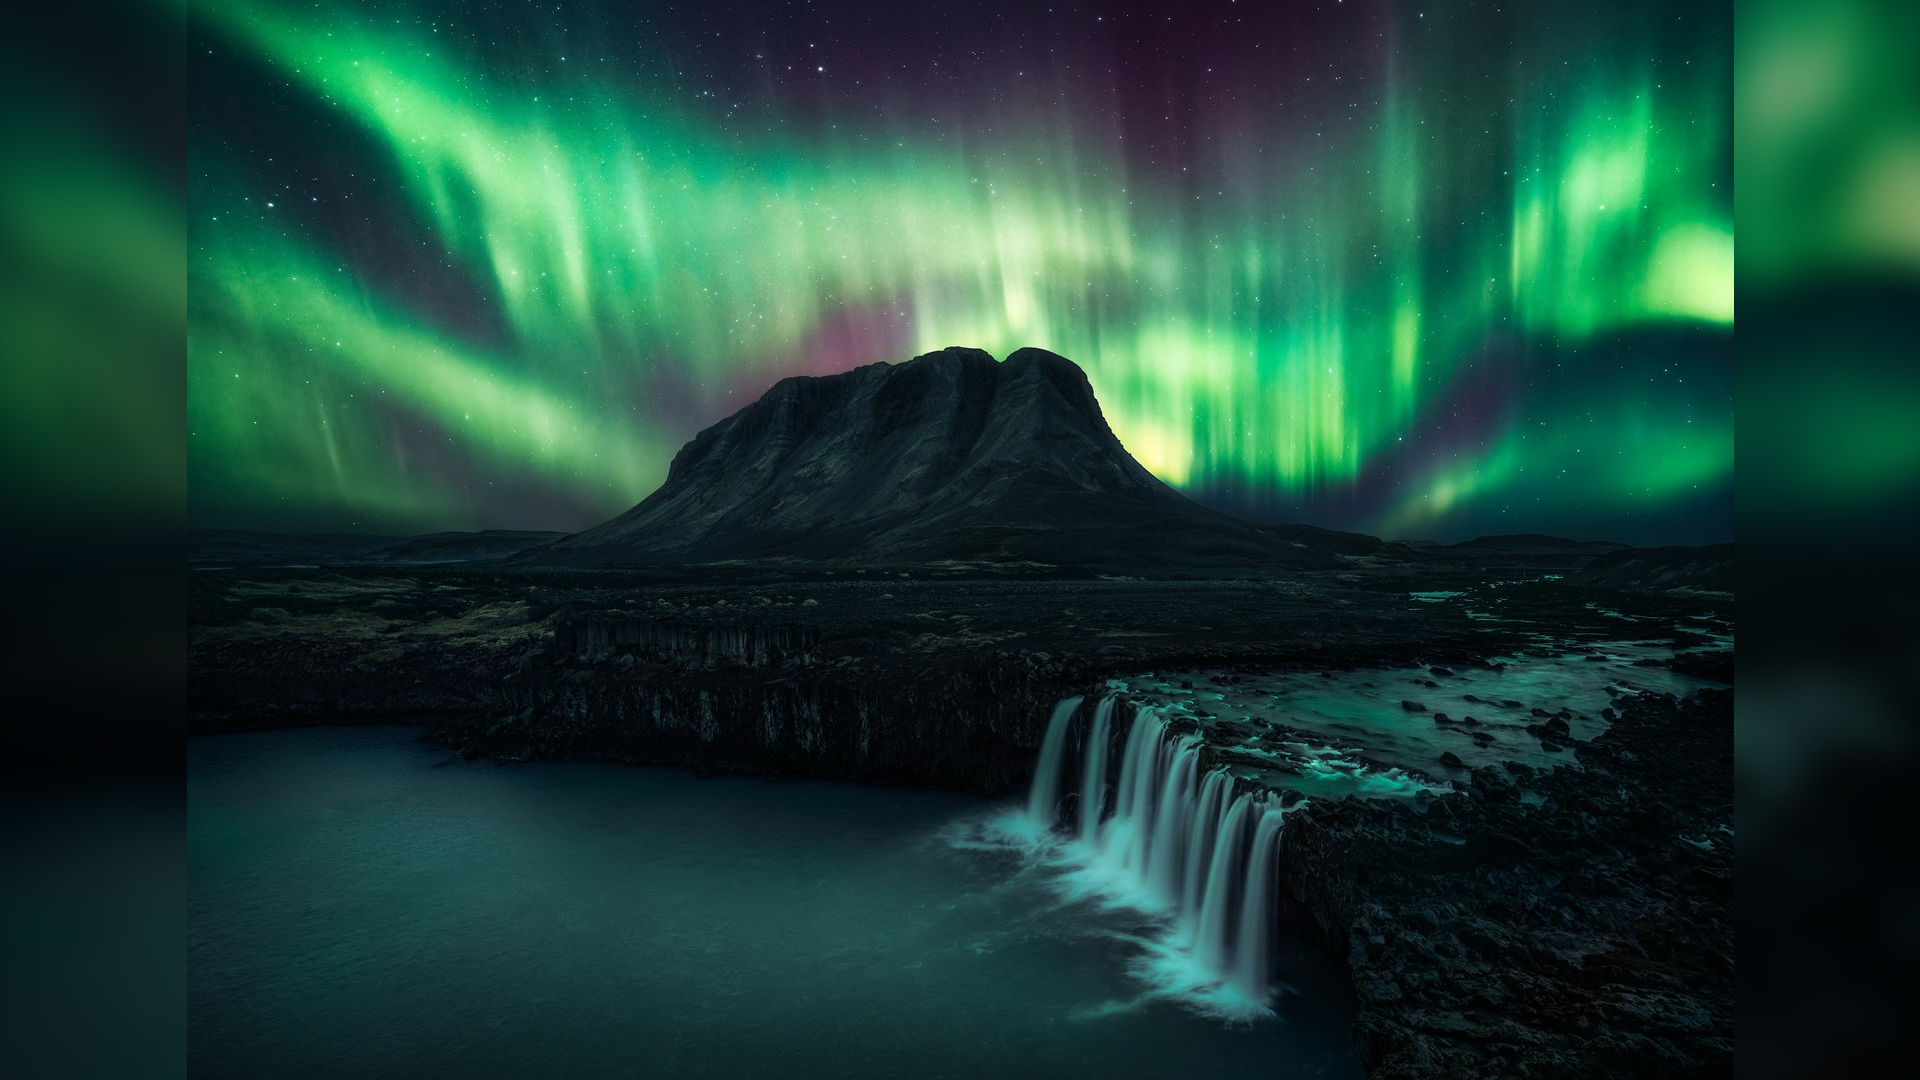 A photo of the northern lights, part of the travel photography blog Capture the Atlas 2022 Northern Lights Photographer of the Year collection. This image was taken by Jannes Krause.